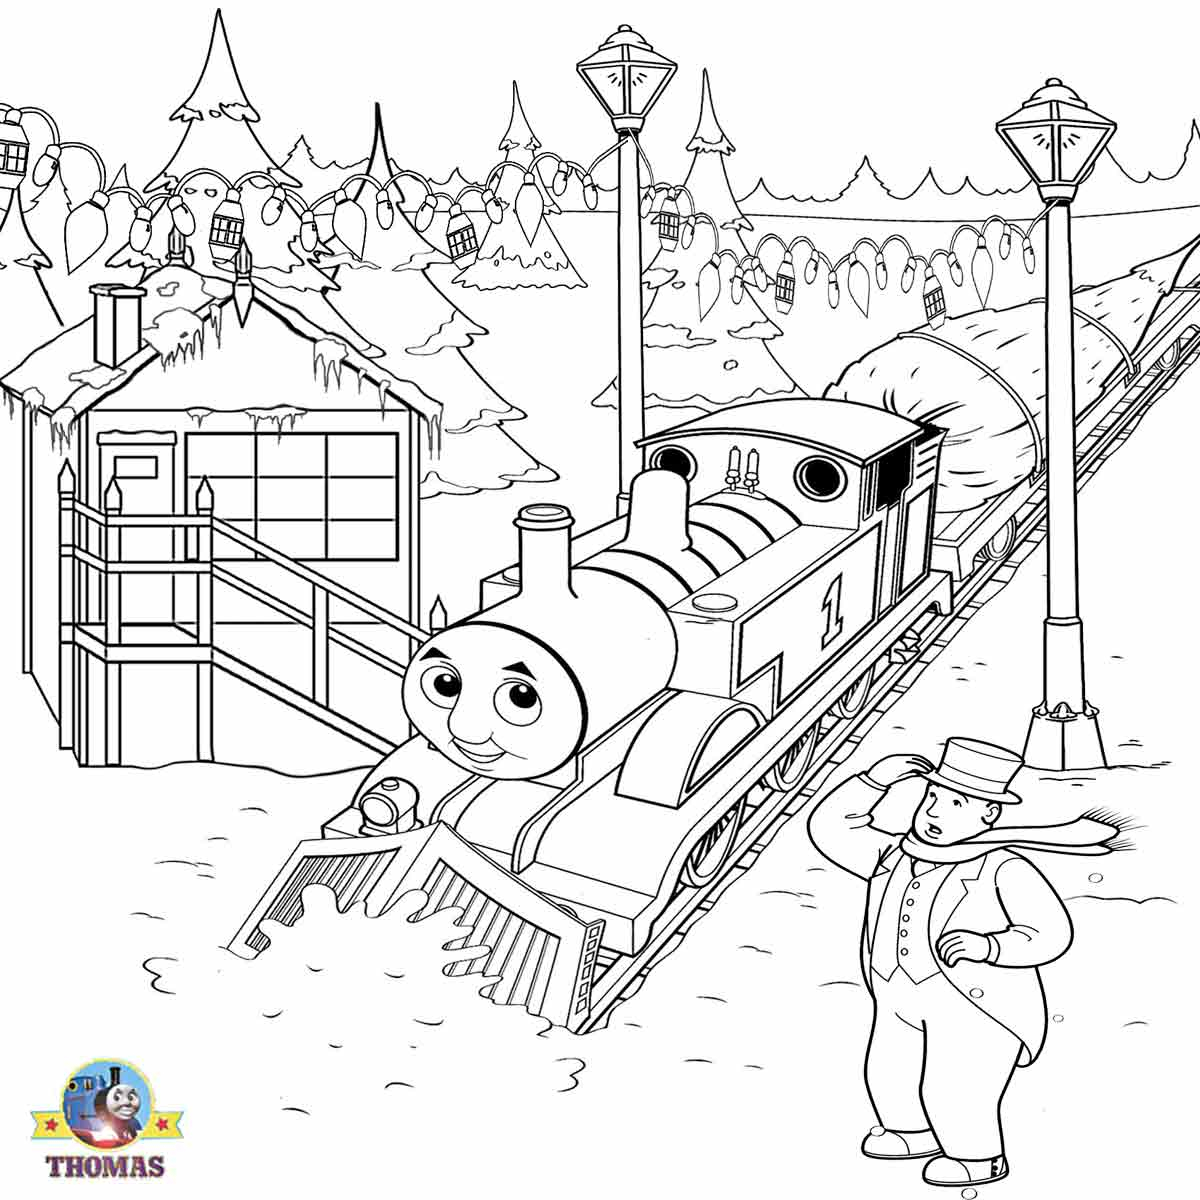 Christmas Toys Coloring Pages Thomas The Train Christmas Coloring Pages At Getdrawings Free